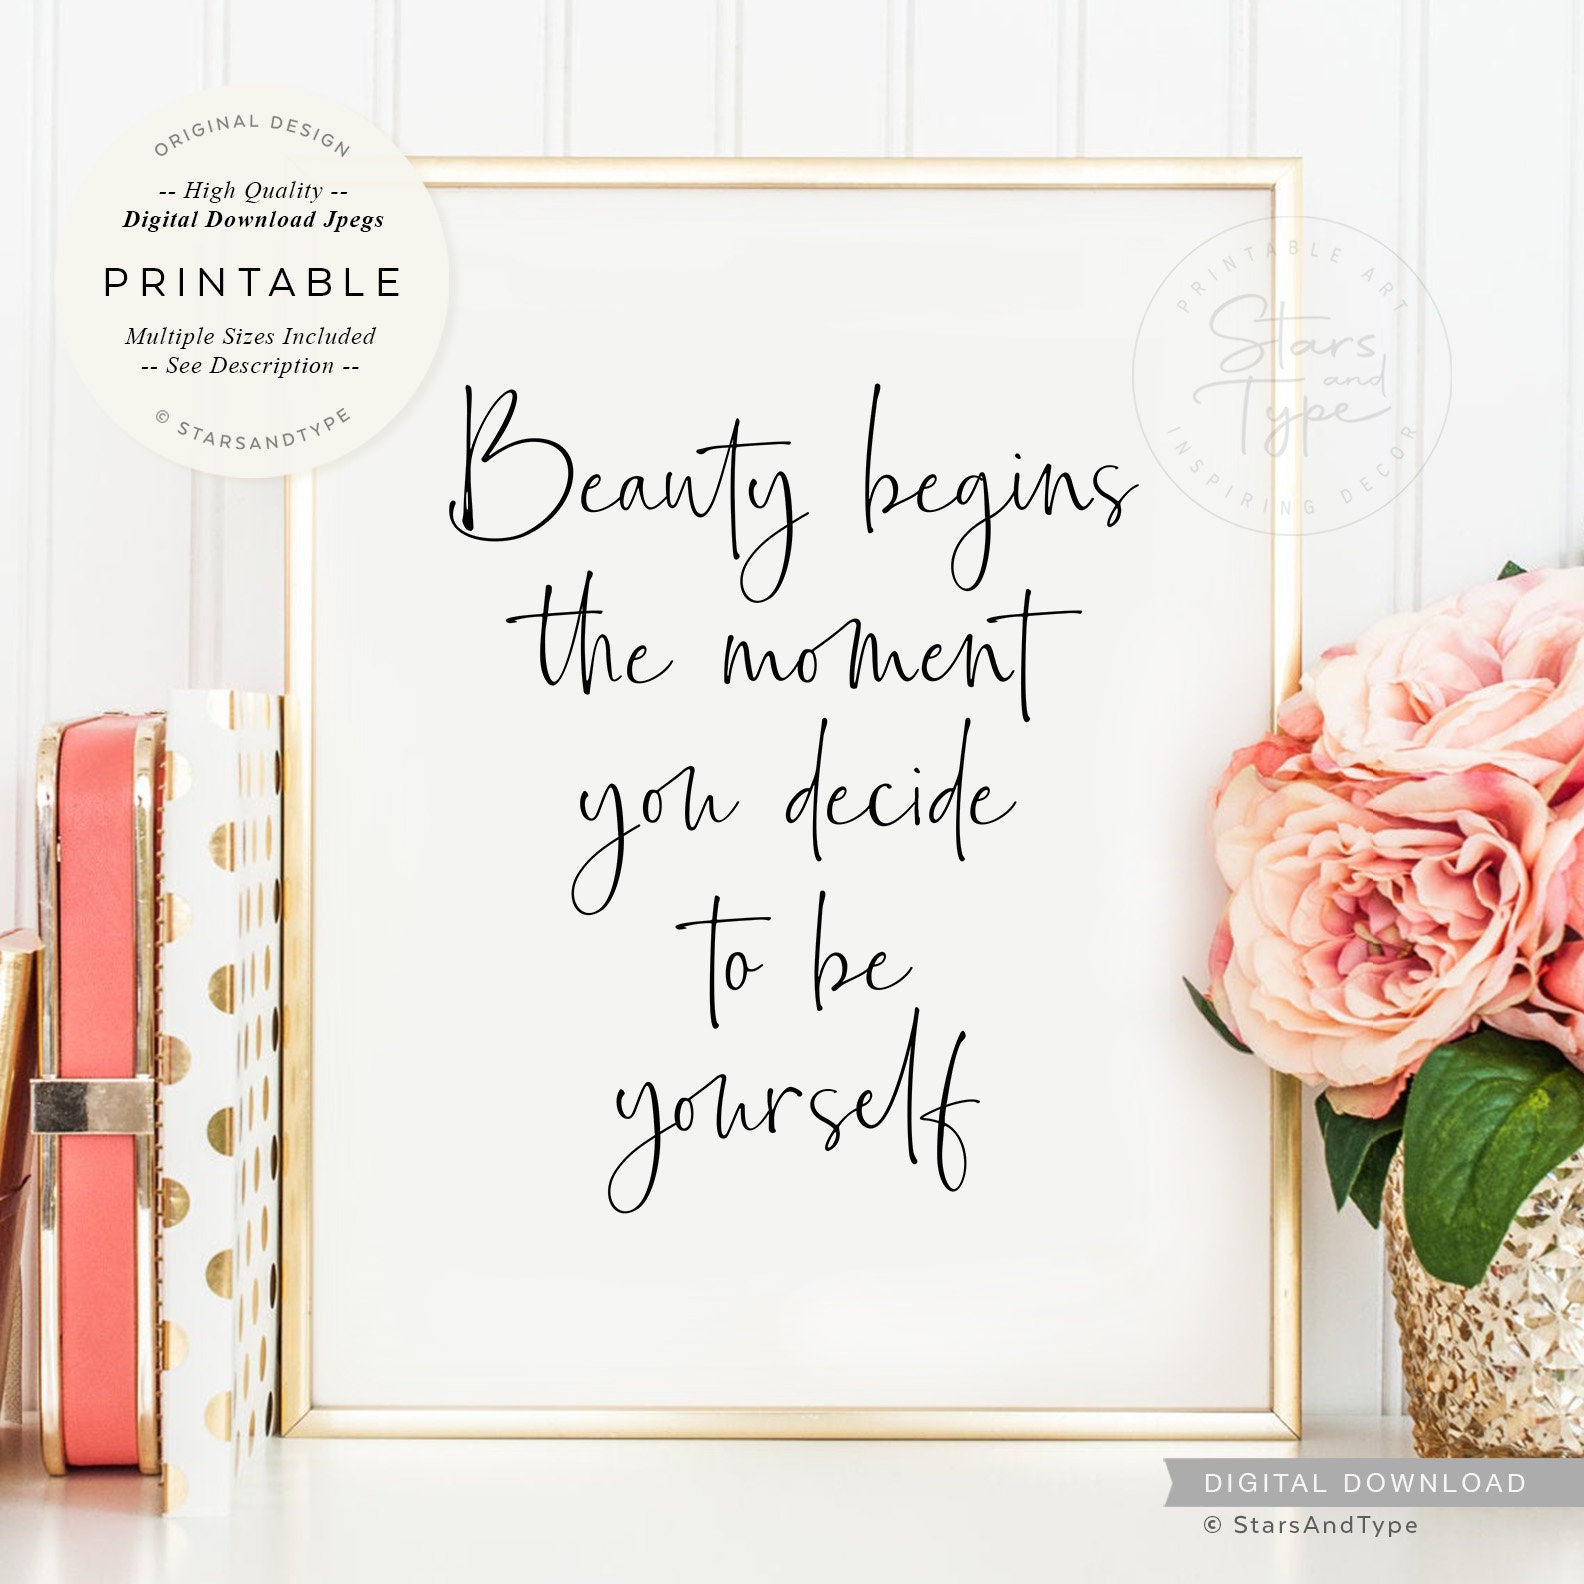 Beauty begins the moment you decide to be yourself -Coco Chanel